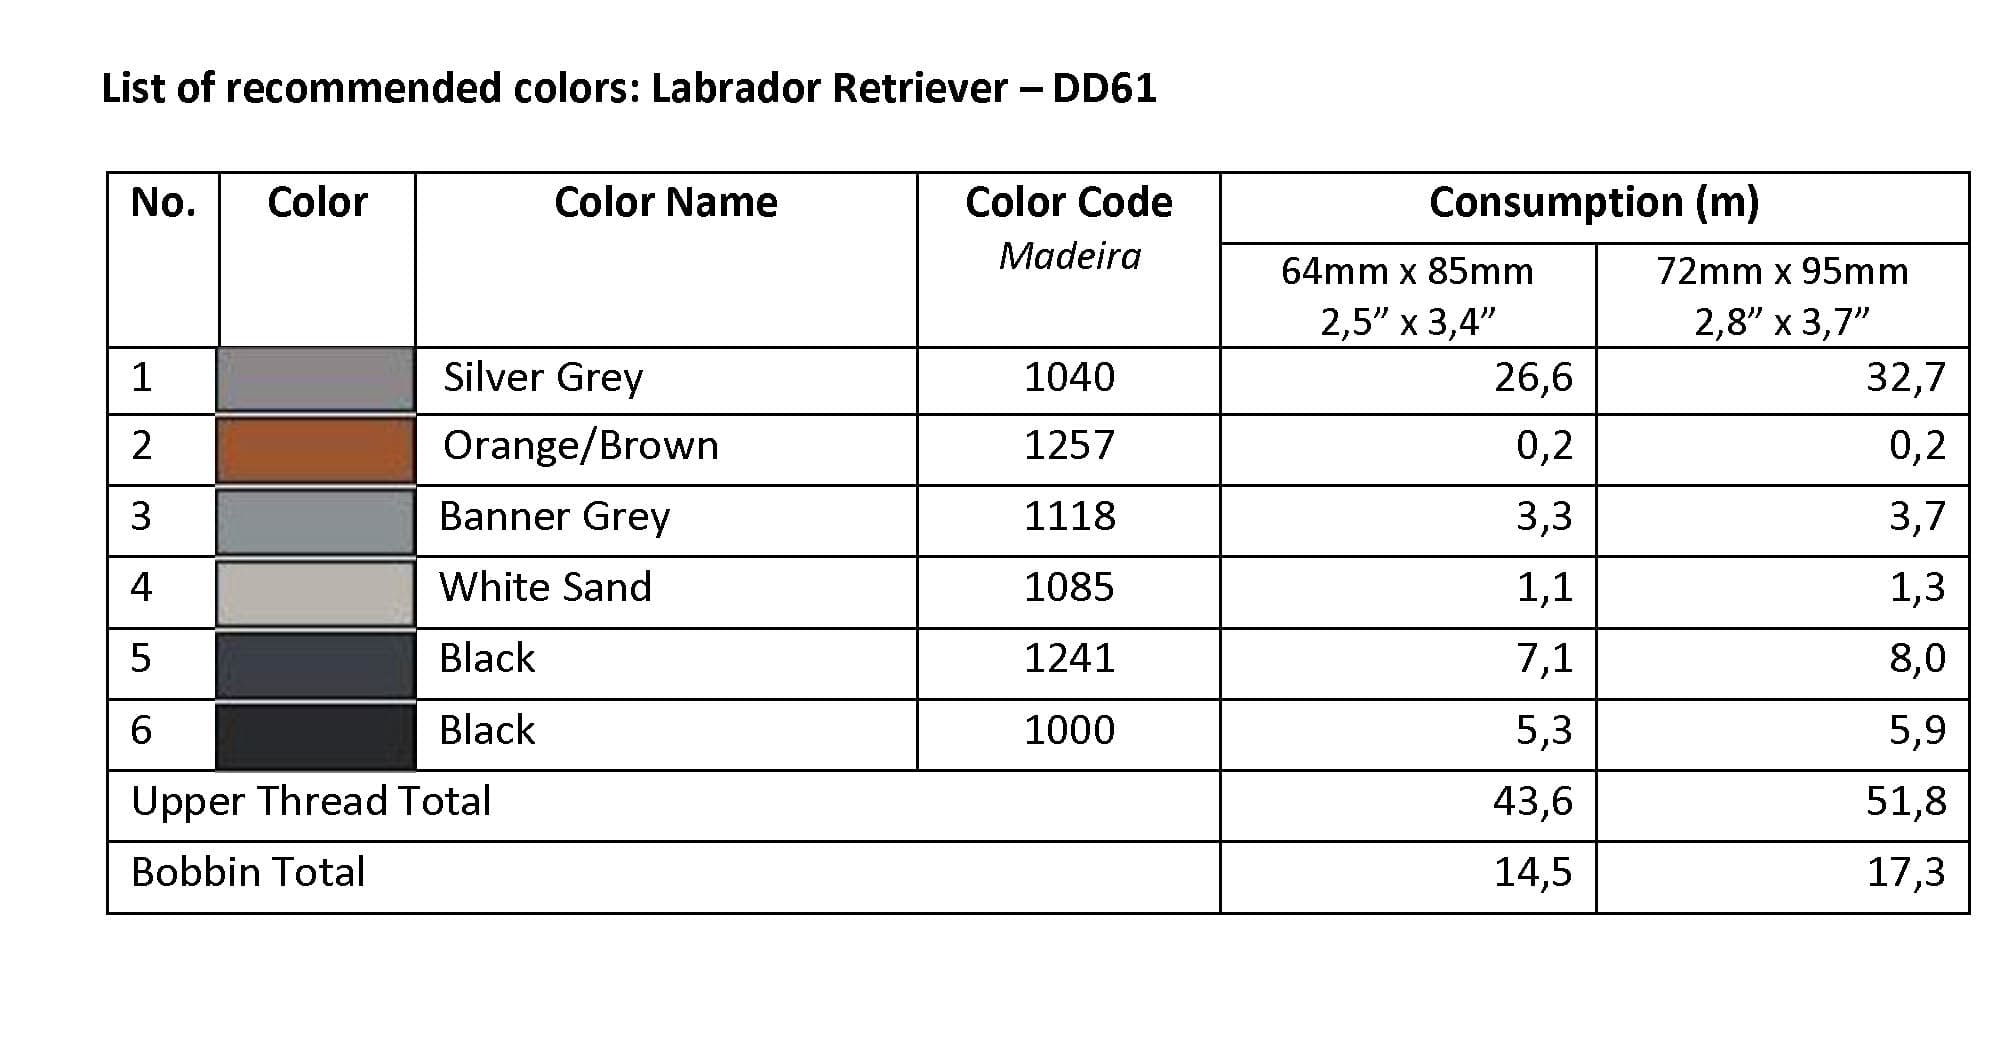 List of Recommended Colors -Labrador Retriever DD61